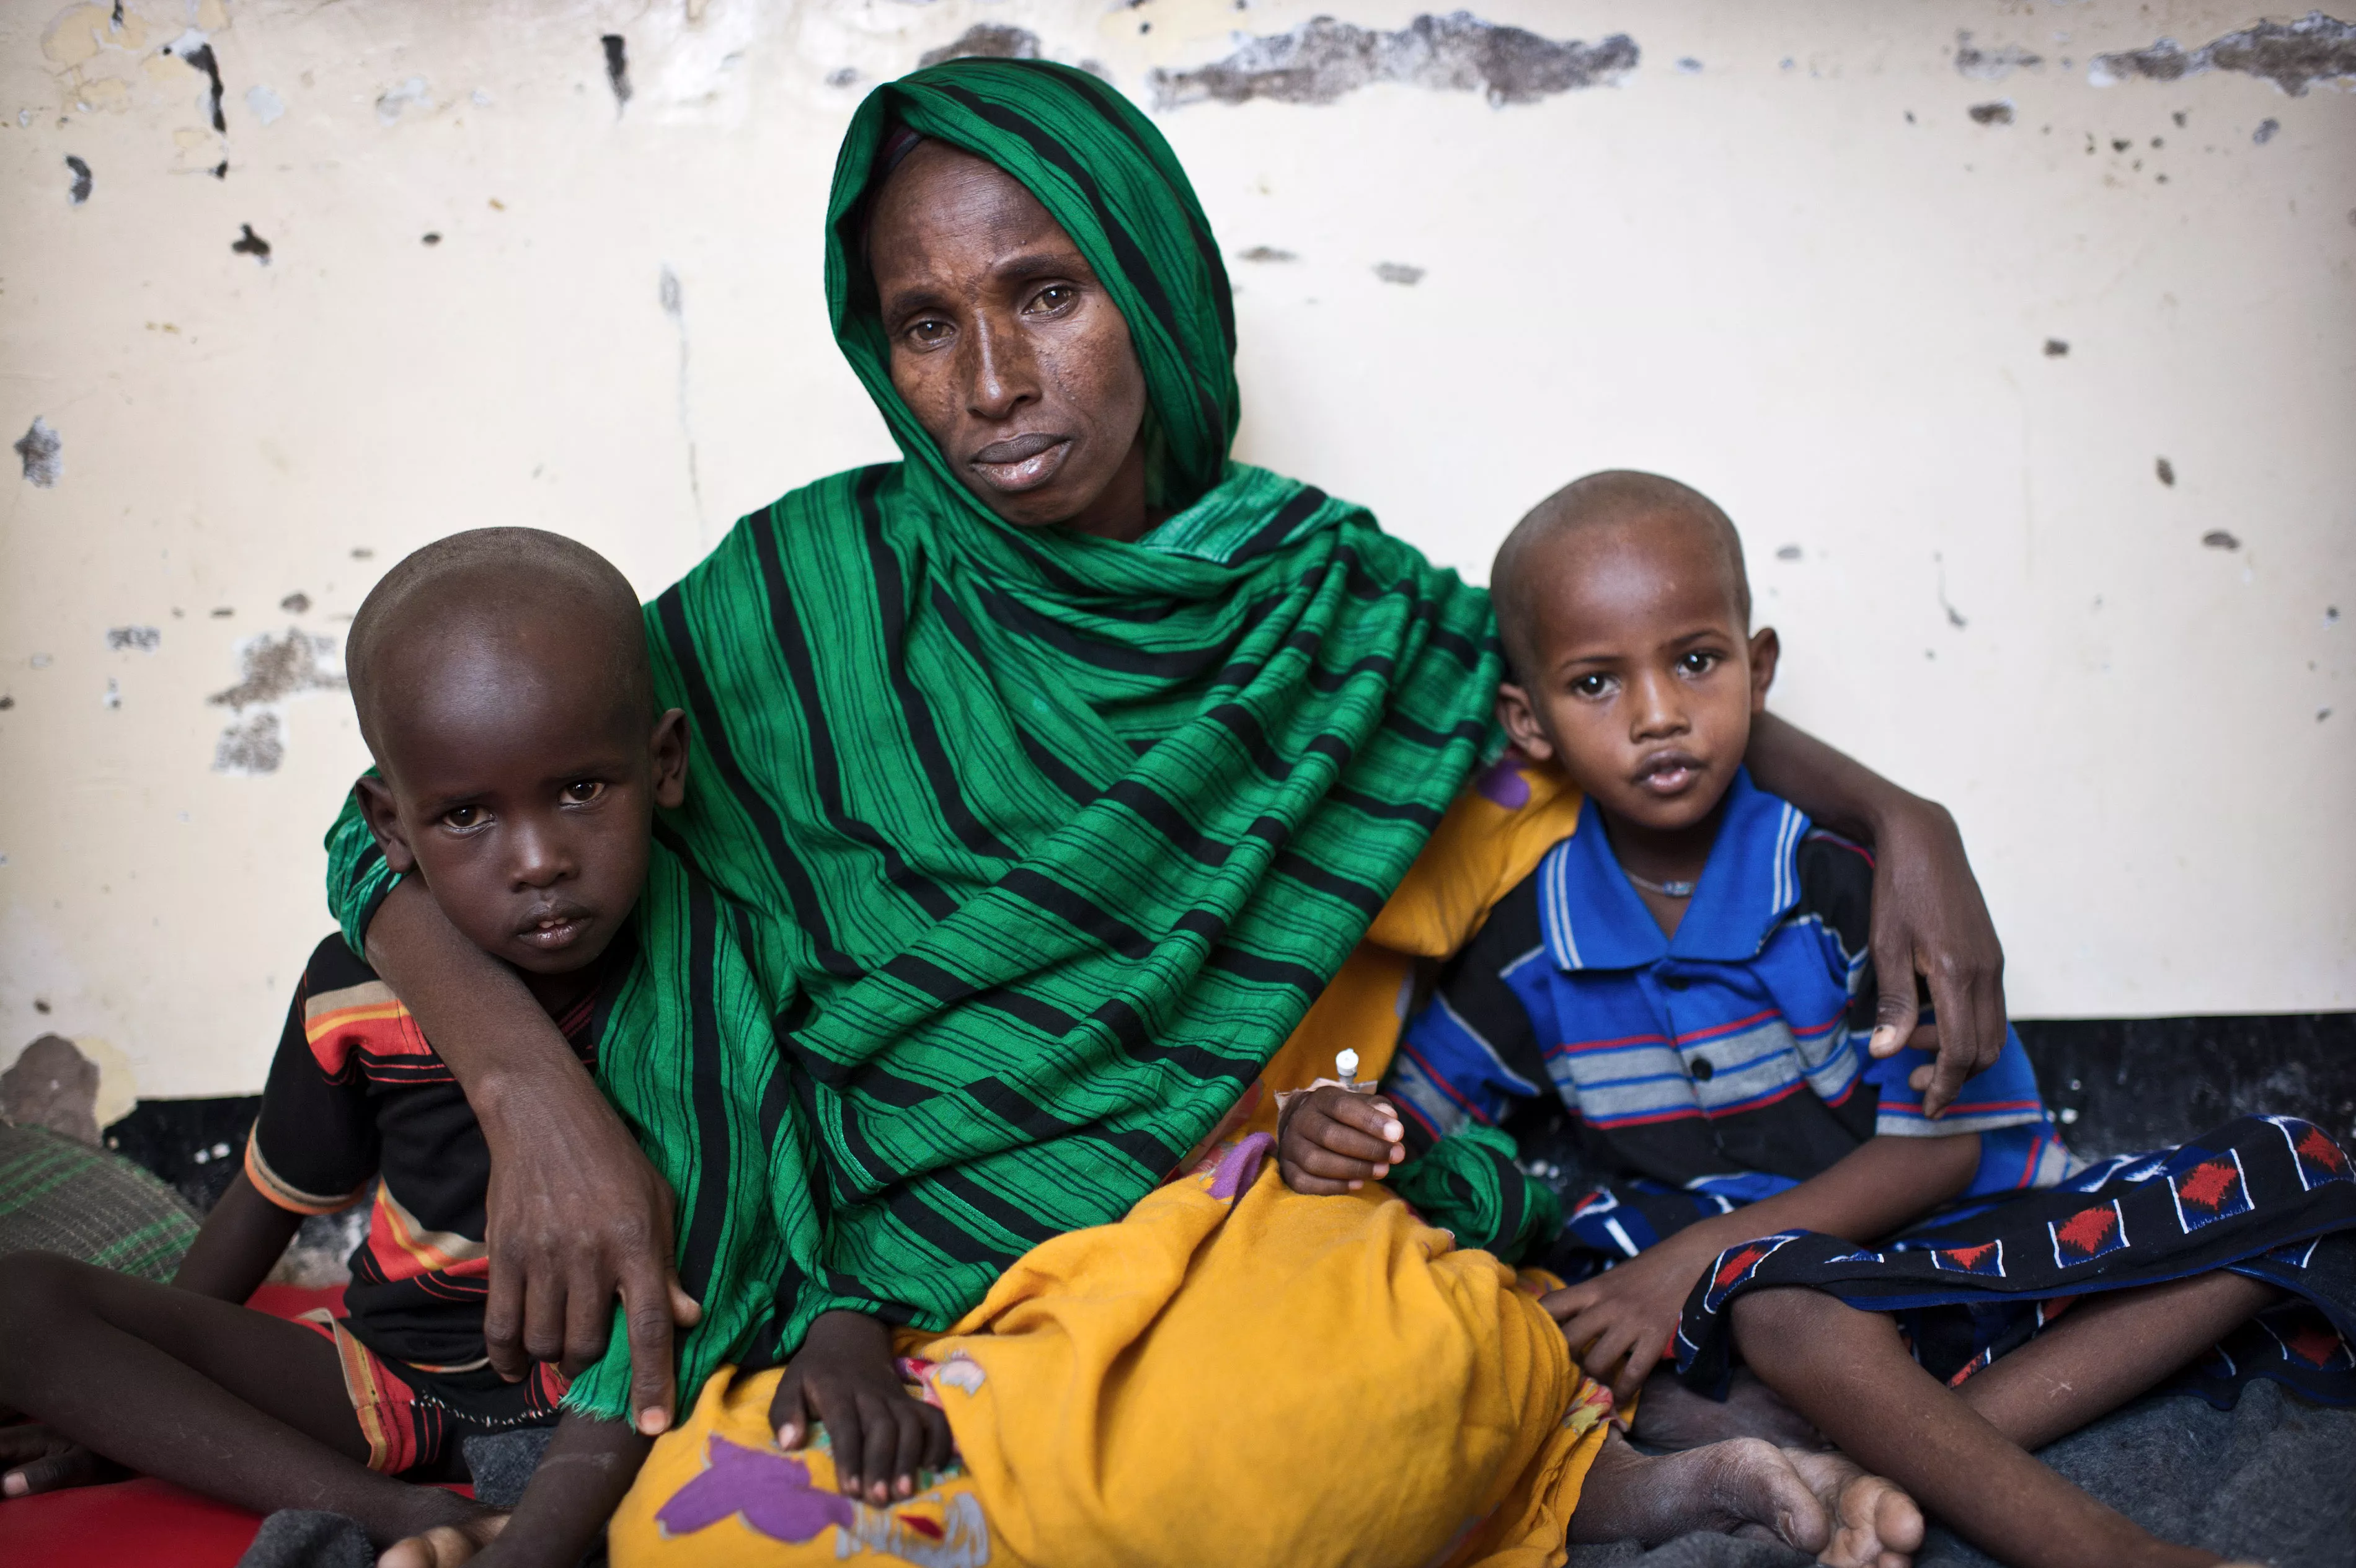 abiba Dahir Muse with her two sons Shafeer (4, left) and Abdikayr, (5, right). They came from Galgaduud region, about 160 kilometers from Galcayo. Her children were suffering from Diphtheria, two of her daughters died already. After their funeral she took the bus and brought her sons to the hospital. The transport money was collected among her community. After some days in isolation the boys are getting better and are now in the TFC (Therapeutic Feeding Centre) at the hospital MSF runs in Galcayo South. Hab